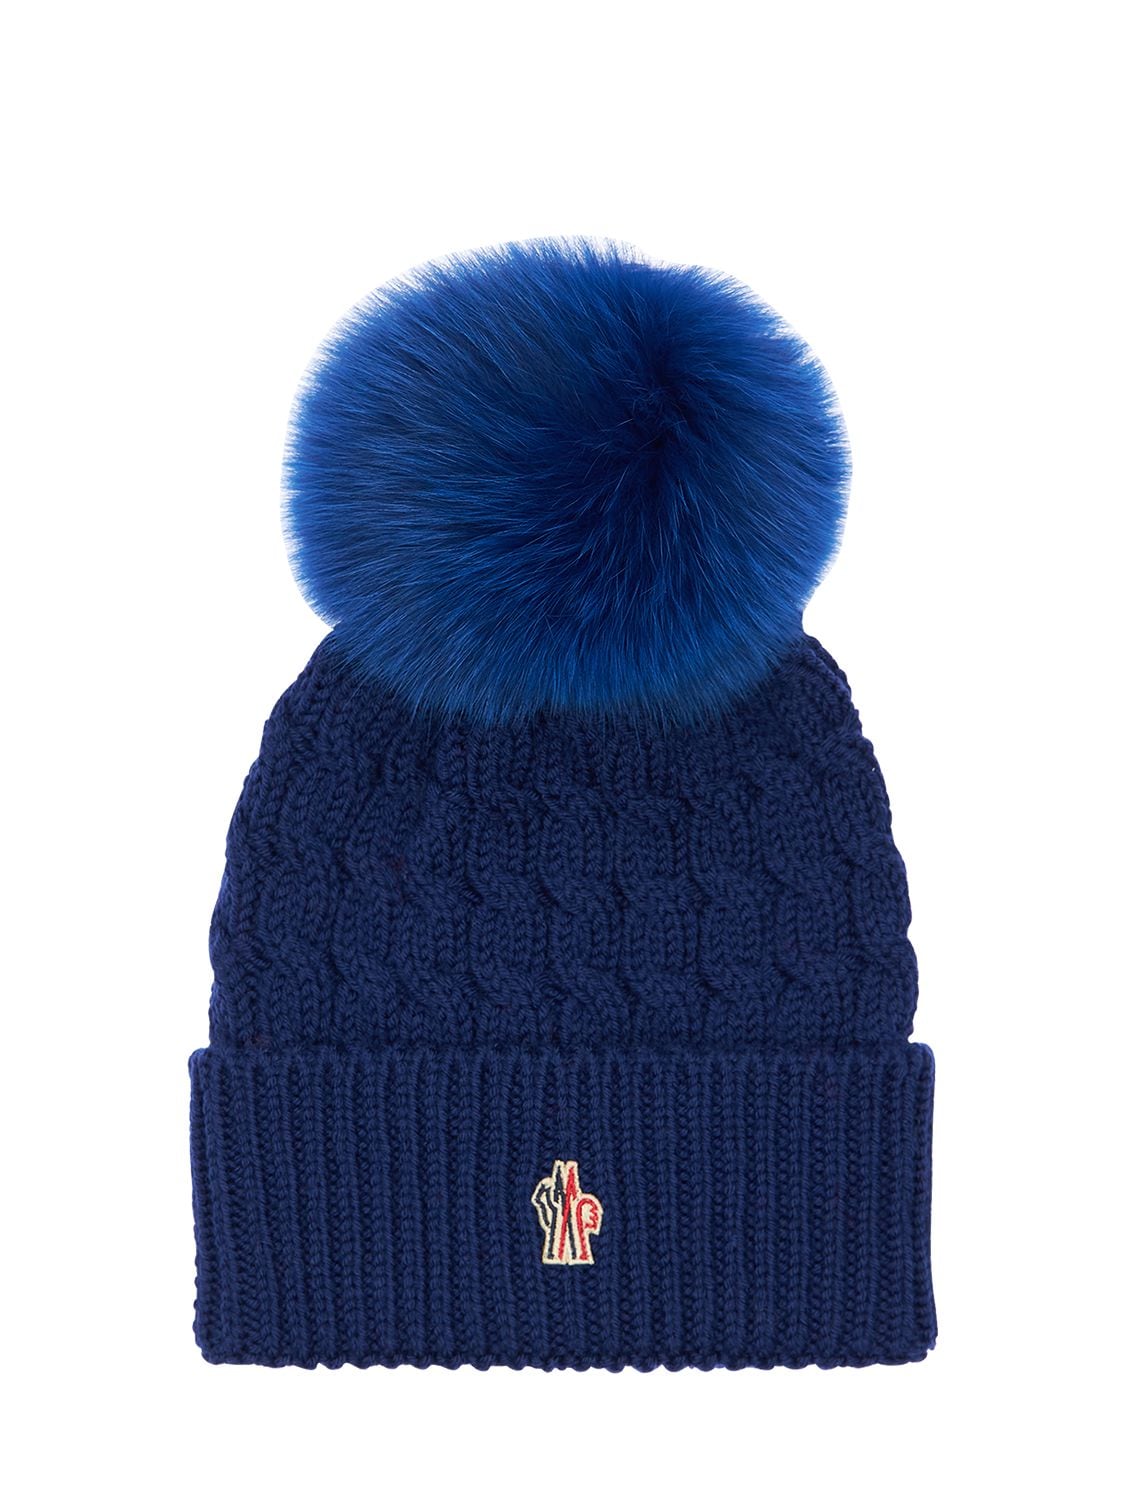 Moncler Wool Cable Knit Hat W/ Pom Pom In Dark Blue